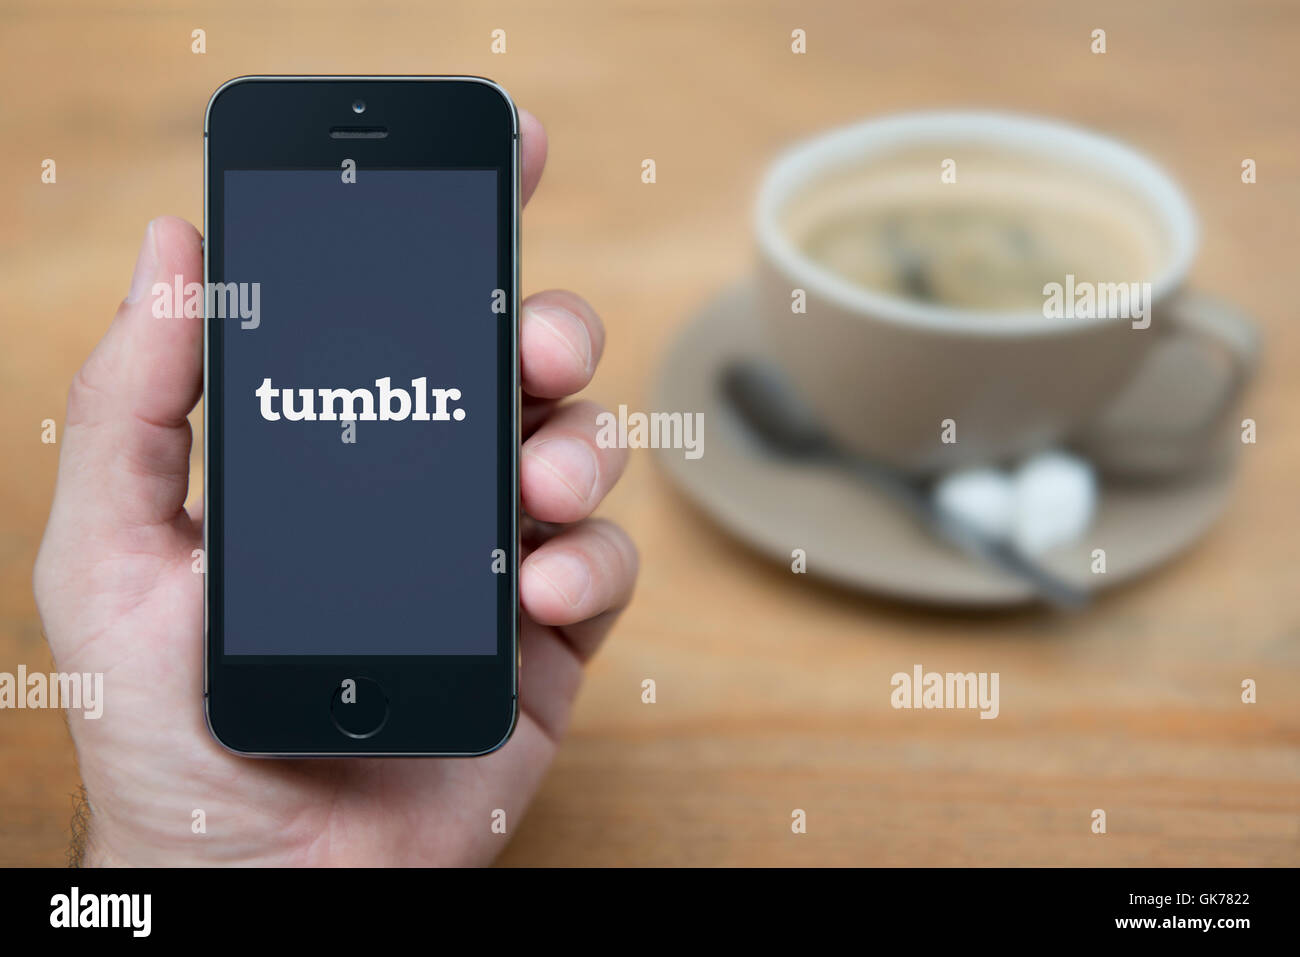 A man looks at his iPhone which displays the Tumblr logo, while sat with a cup of coffee (Editorial use only). Stock Photo